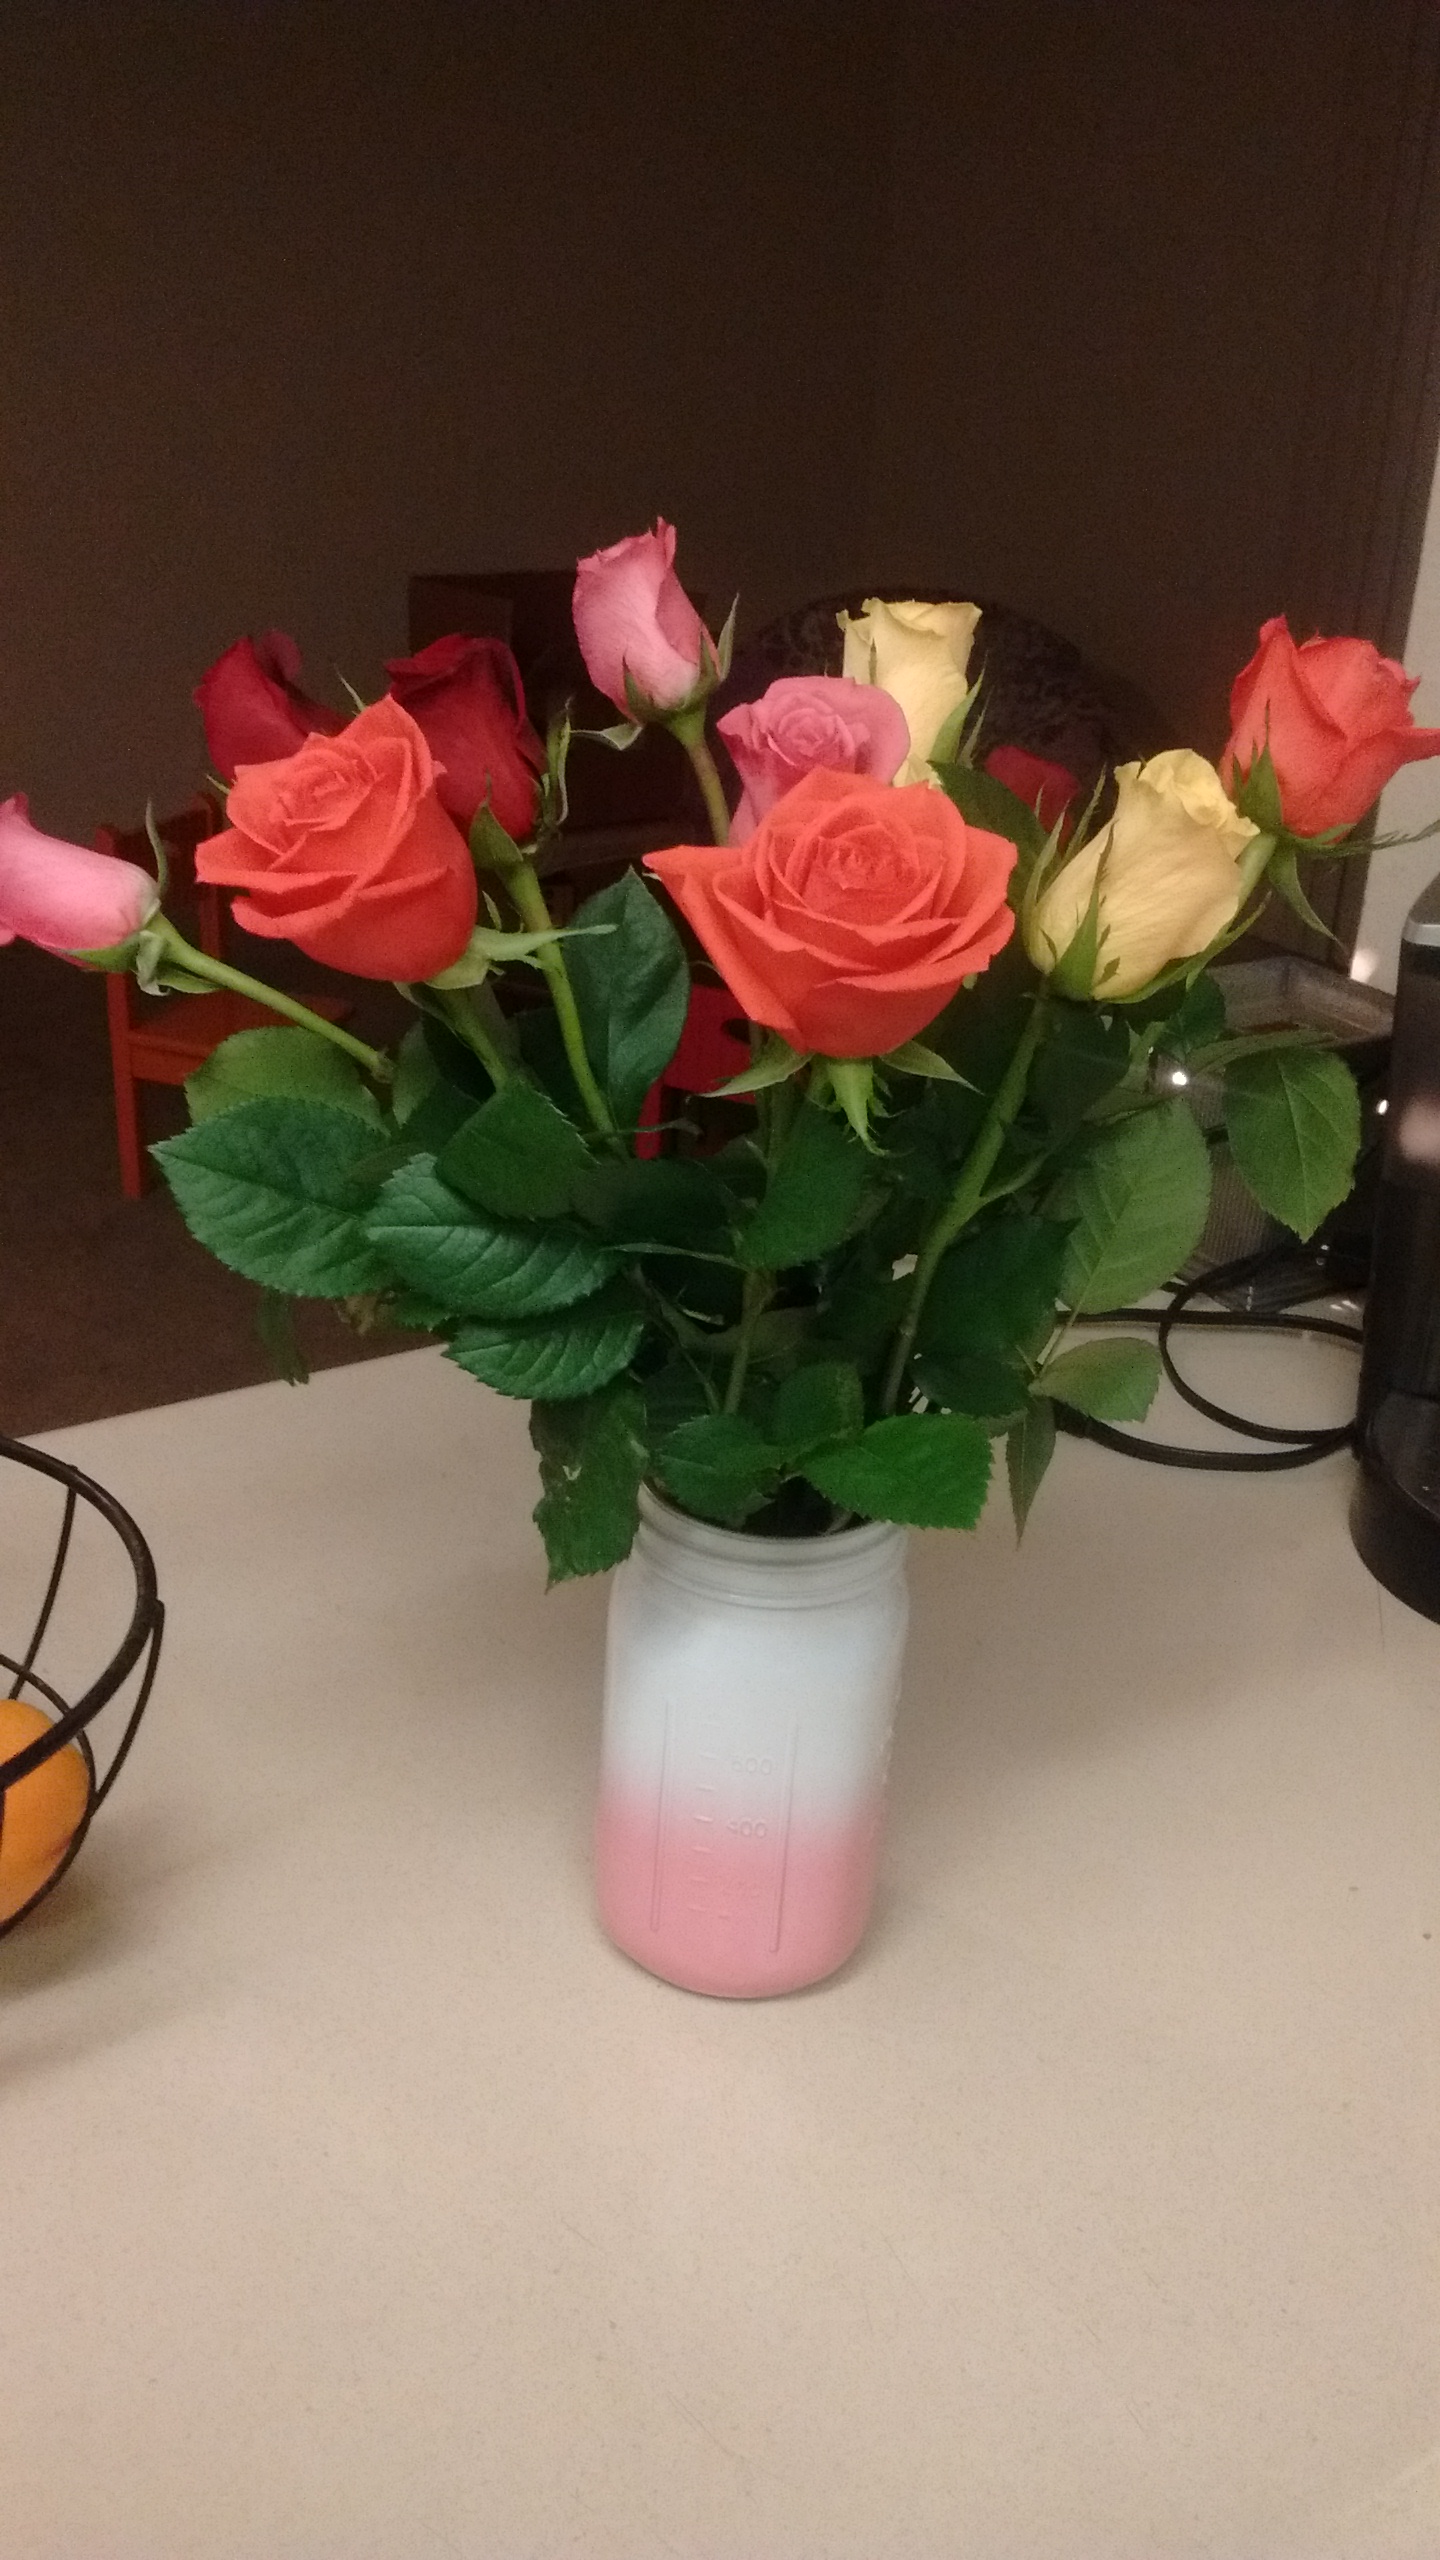 Roses from my dad